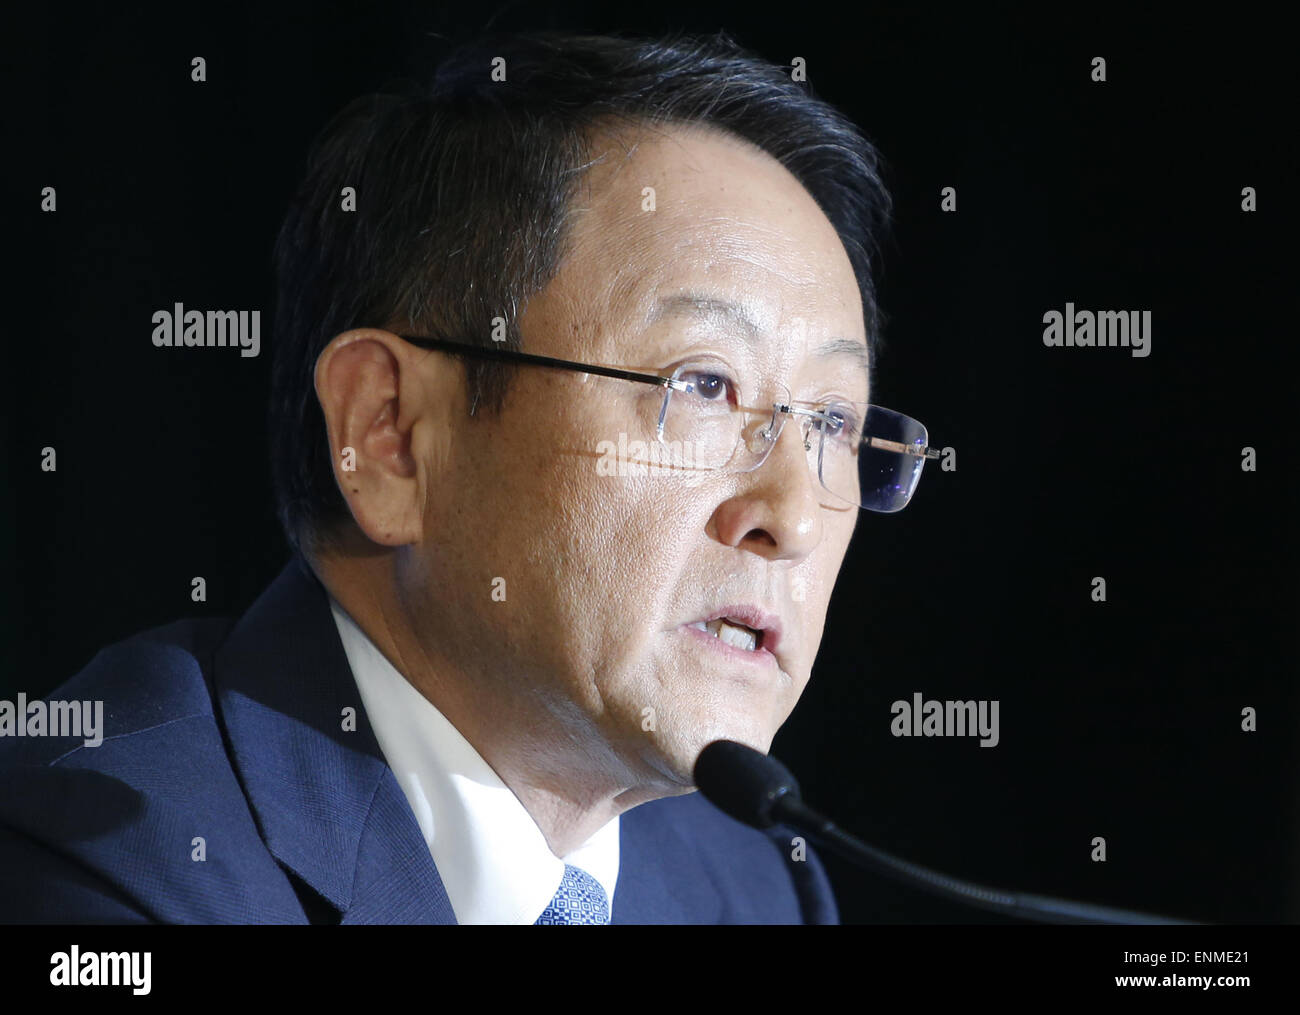 (150508) -- TOKYO, May 8, 2015 (Xinhua) -- Japan's auto giant Toyota's president Akio Toyoda speaks during a press conference to announce Toyota's financial report for 2014 in the headquarters in Tokyo, capital of Japan, on May 8, 2015. Toyota reported the highest-ever profit. (Xinhua/Stringer) Stock Photo